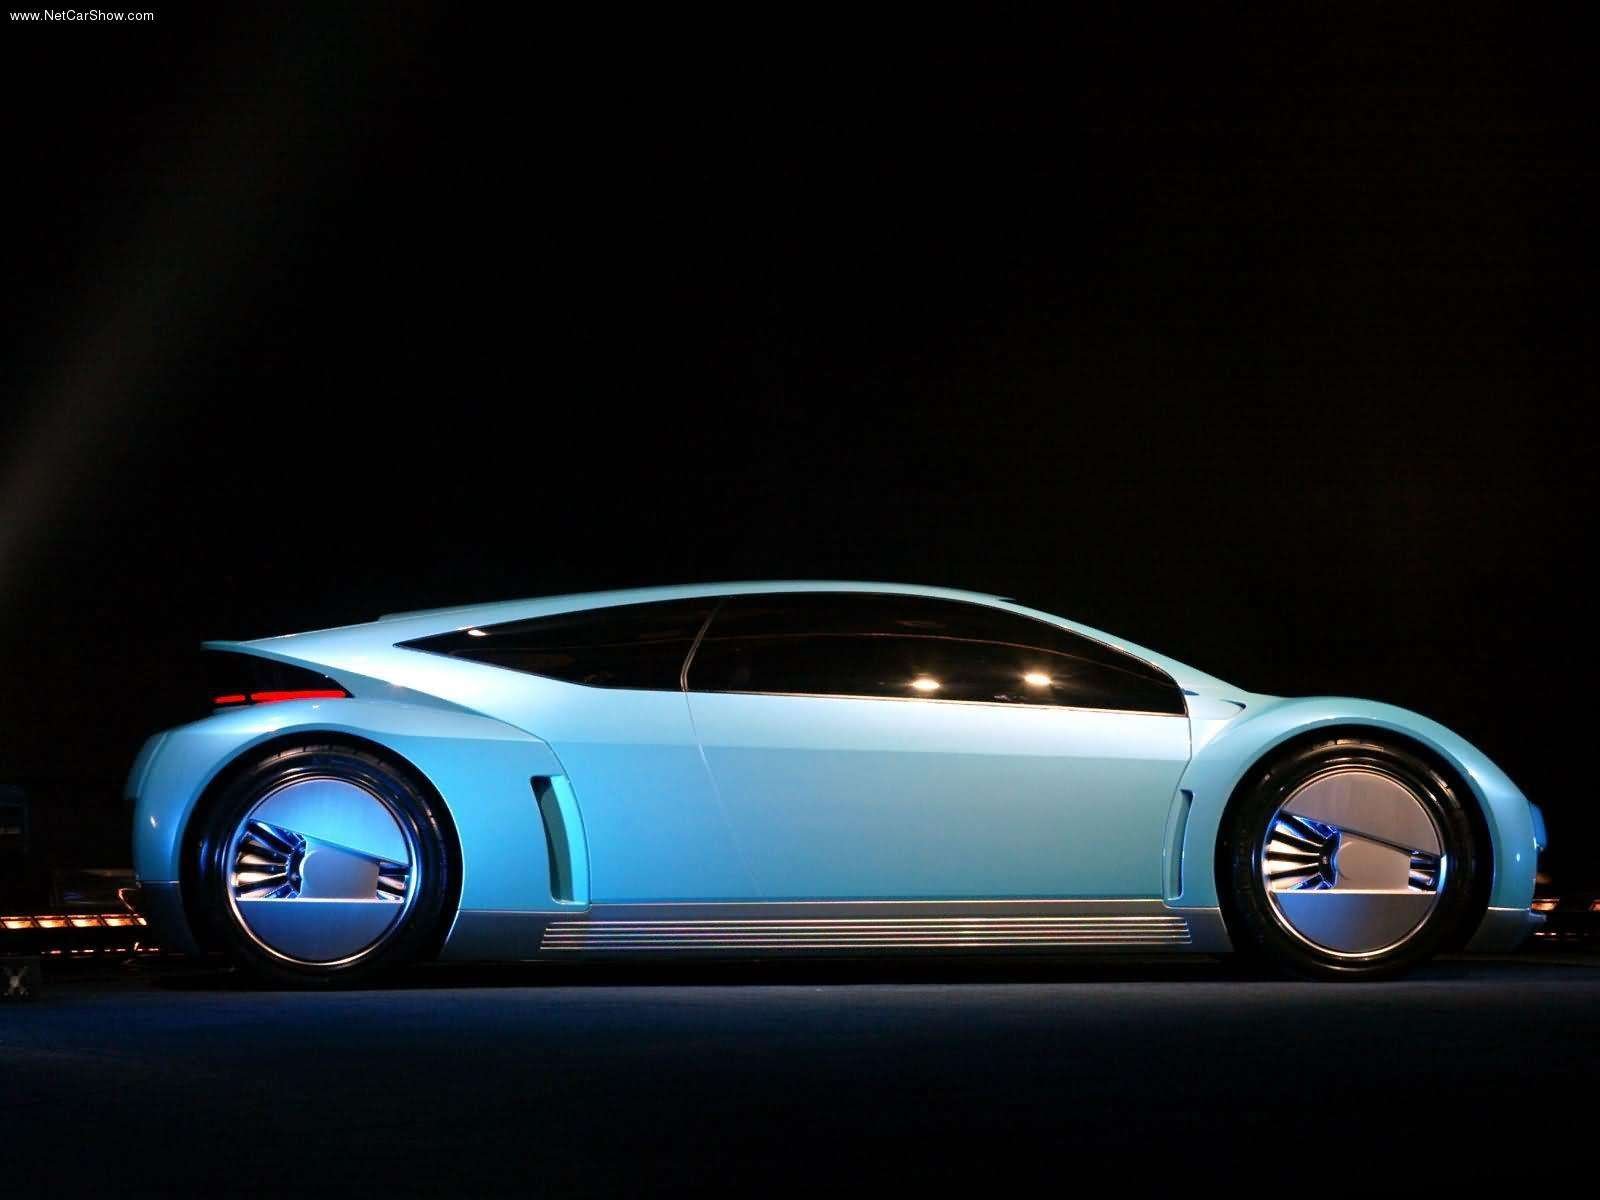 toyota, Fines, Fuelcell, Concept, Cars, 2003 Wallpaper